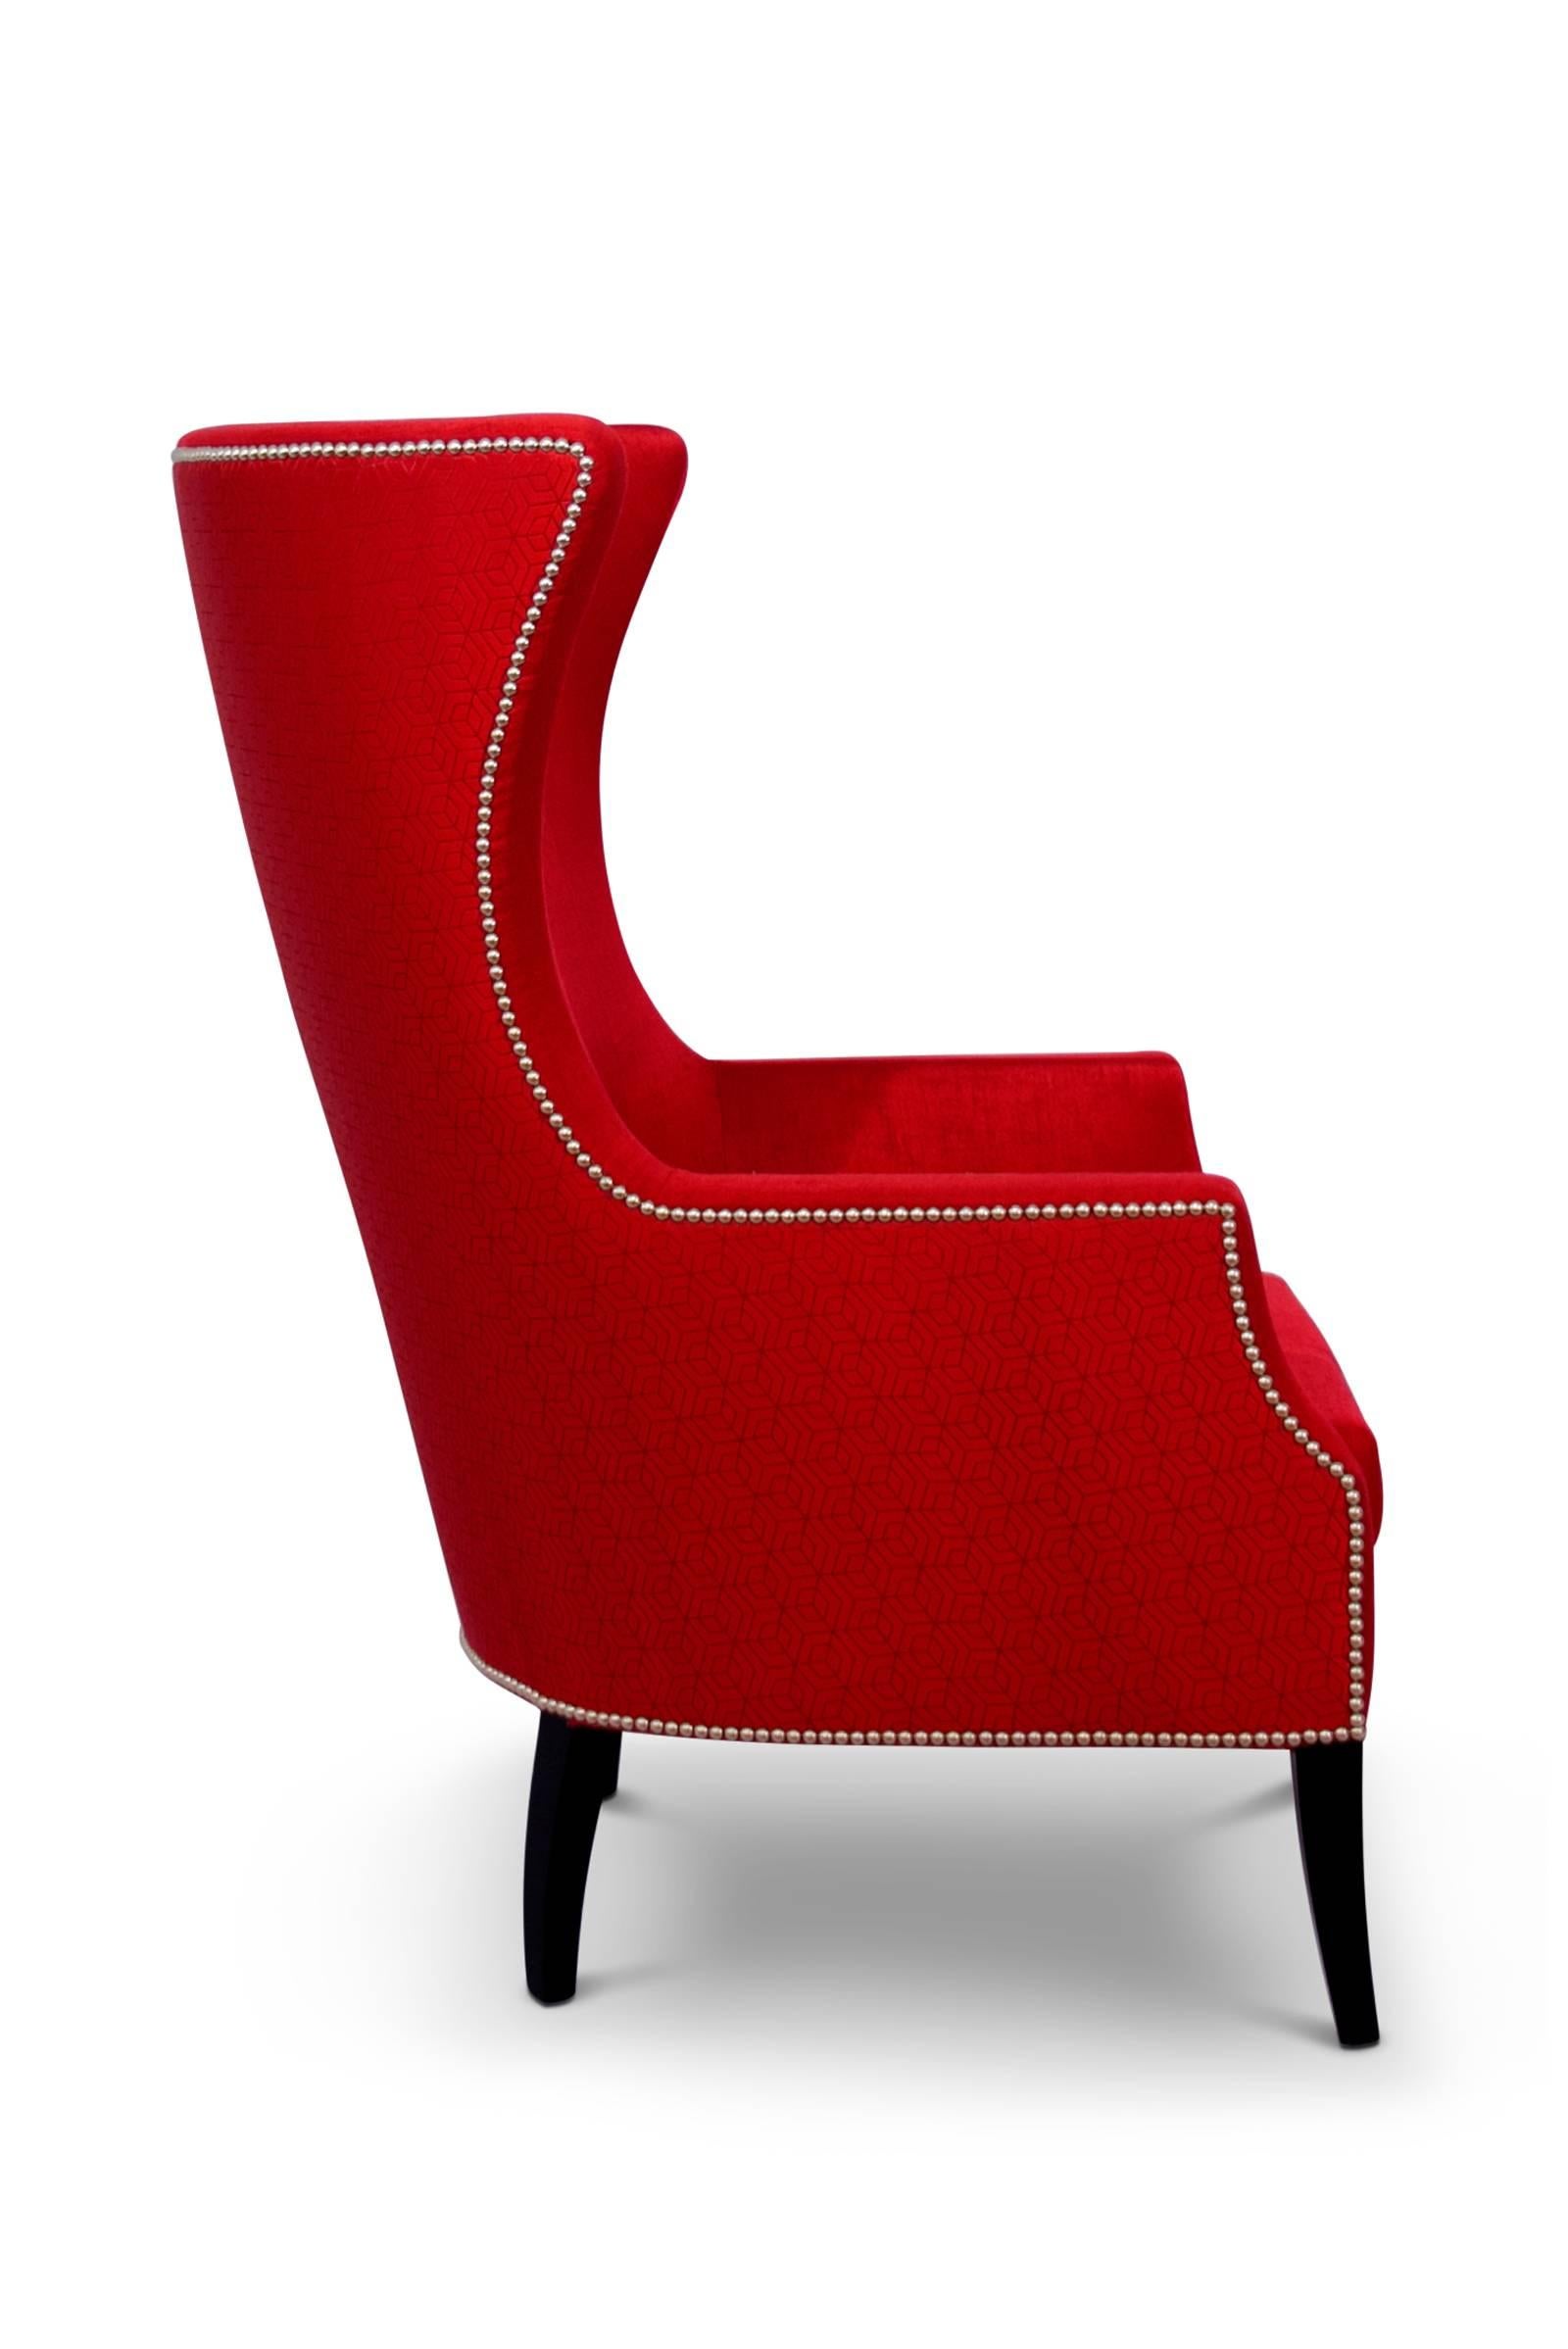 Armchair high Kokomo is in patterned satin red fabric
with black matte lacquered feet and golden polished nails.
